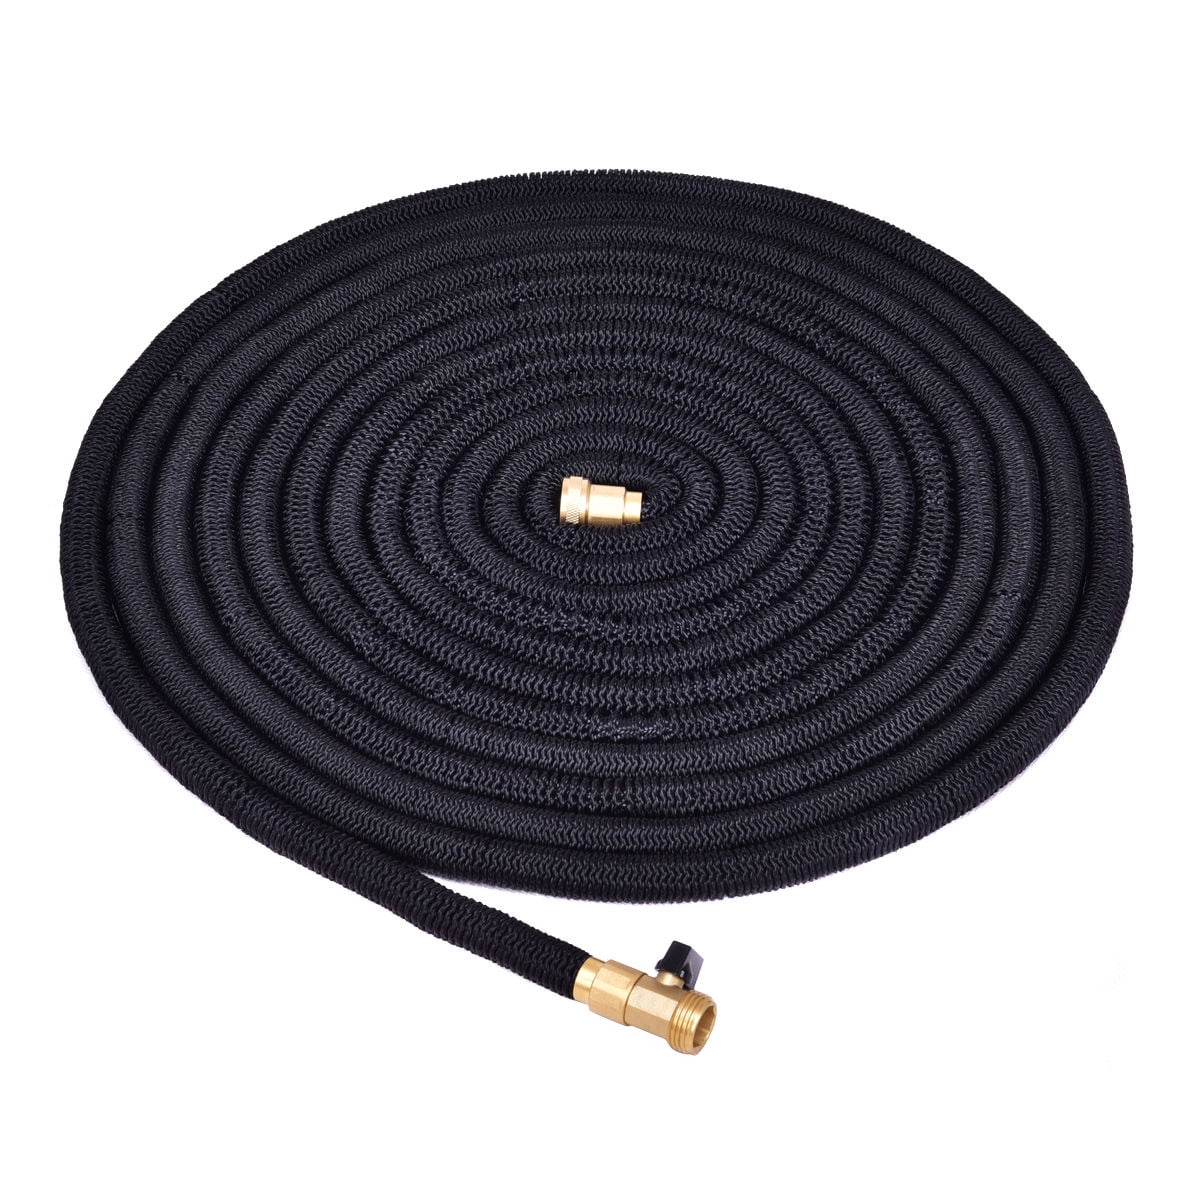 ESOHOSE Expandable Garden Hose 100FT Hoses For Yard 100 Foot Collapsible Hose Water Hose For Lawns And Pet Care Outdoor Hoses That Shrink 100